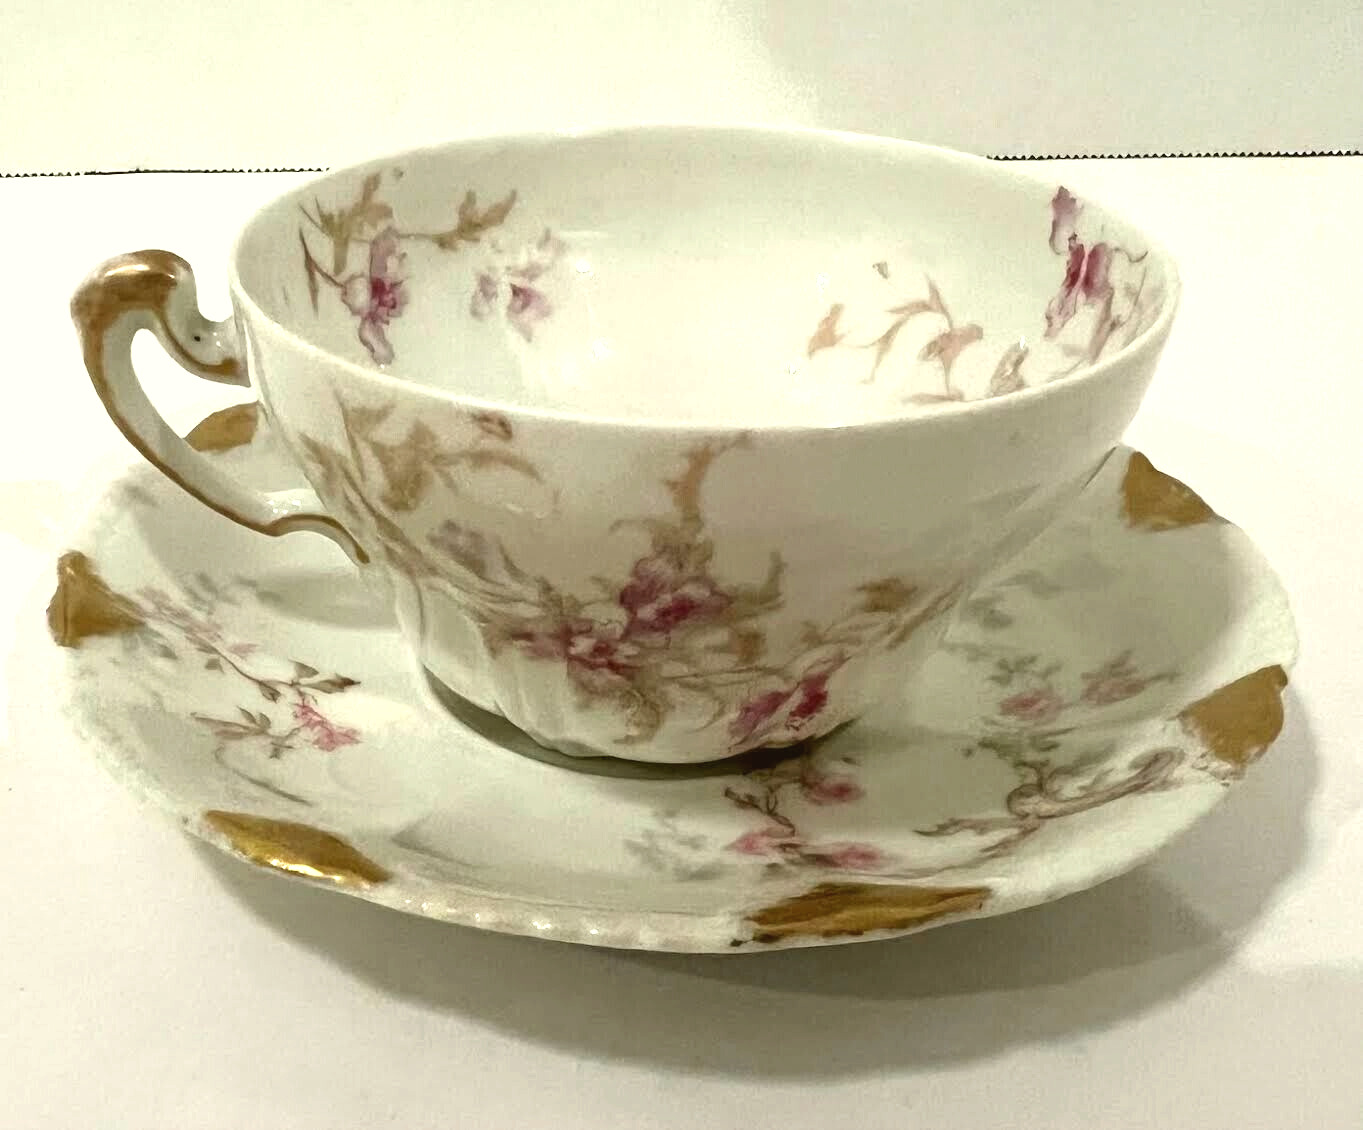 Vintage Theodore Haviland Limoges Tea/Coffee cup and saucer. Schleiger 456 E